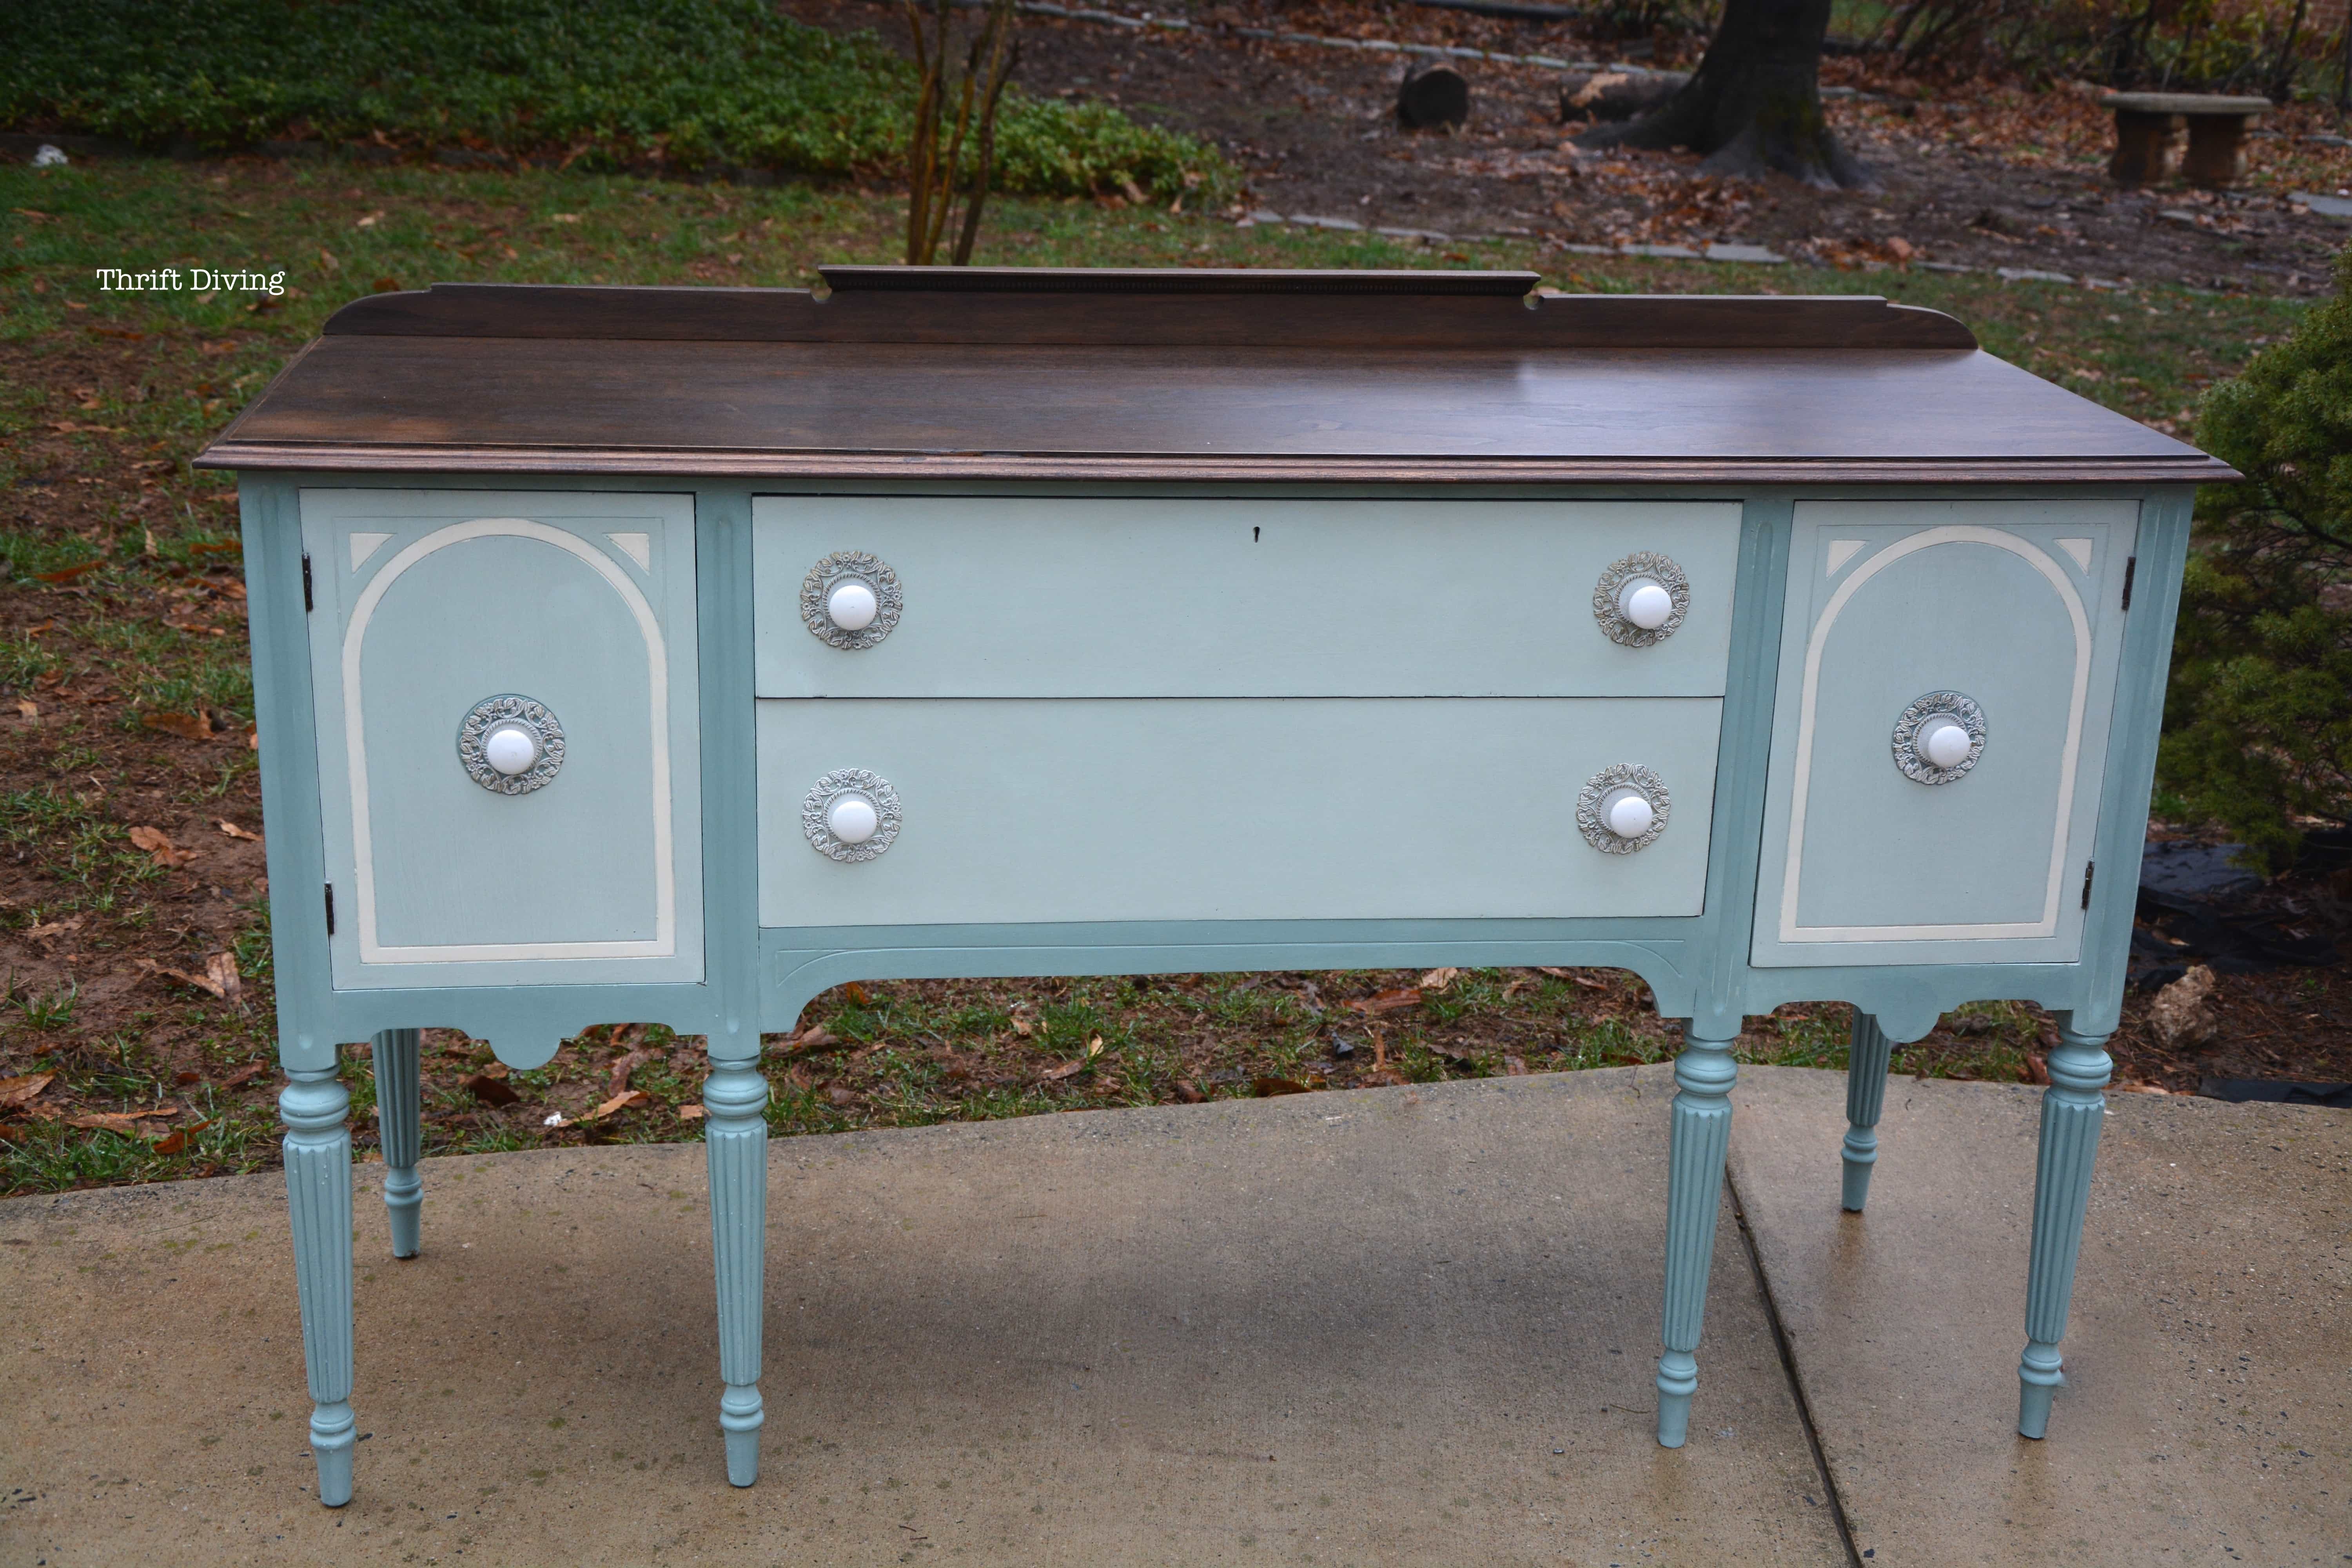 Thrift Haul at Value Village and Unique Thrift Store - Vintage buffet makeover. - Thrift Diving